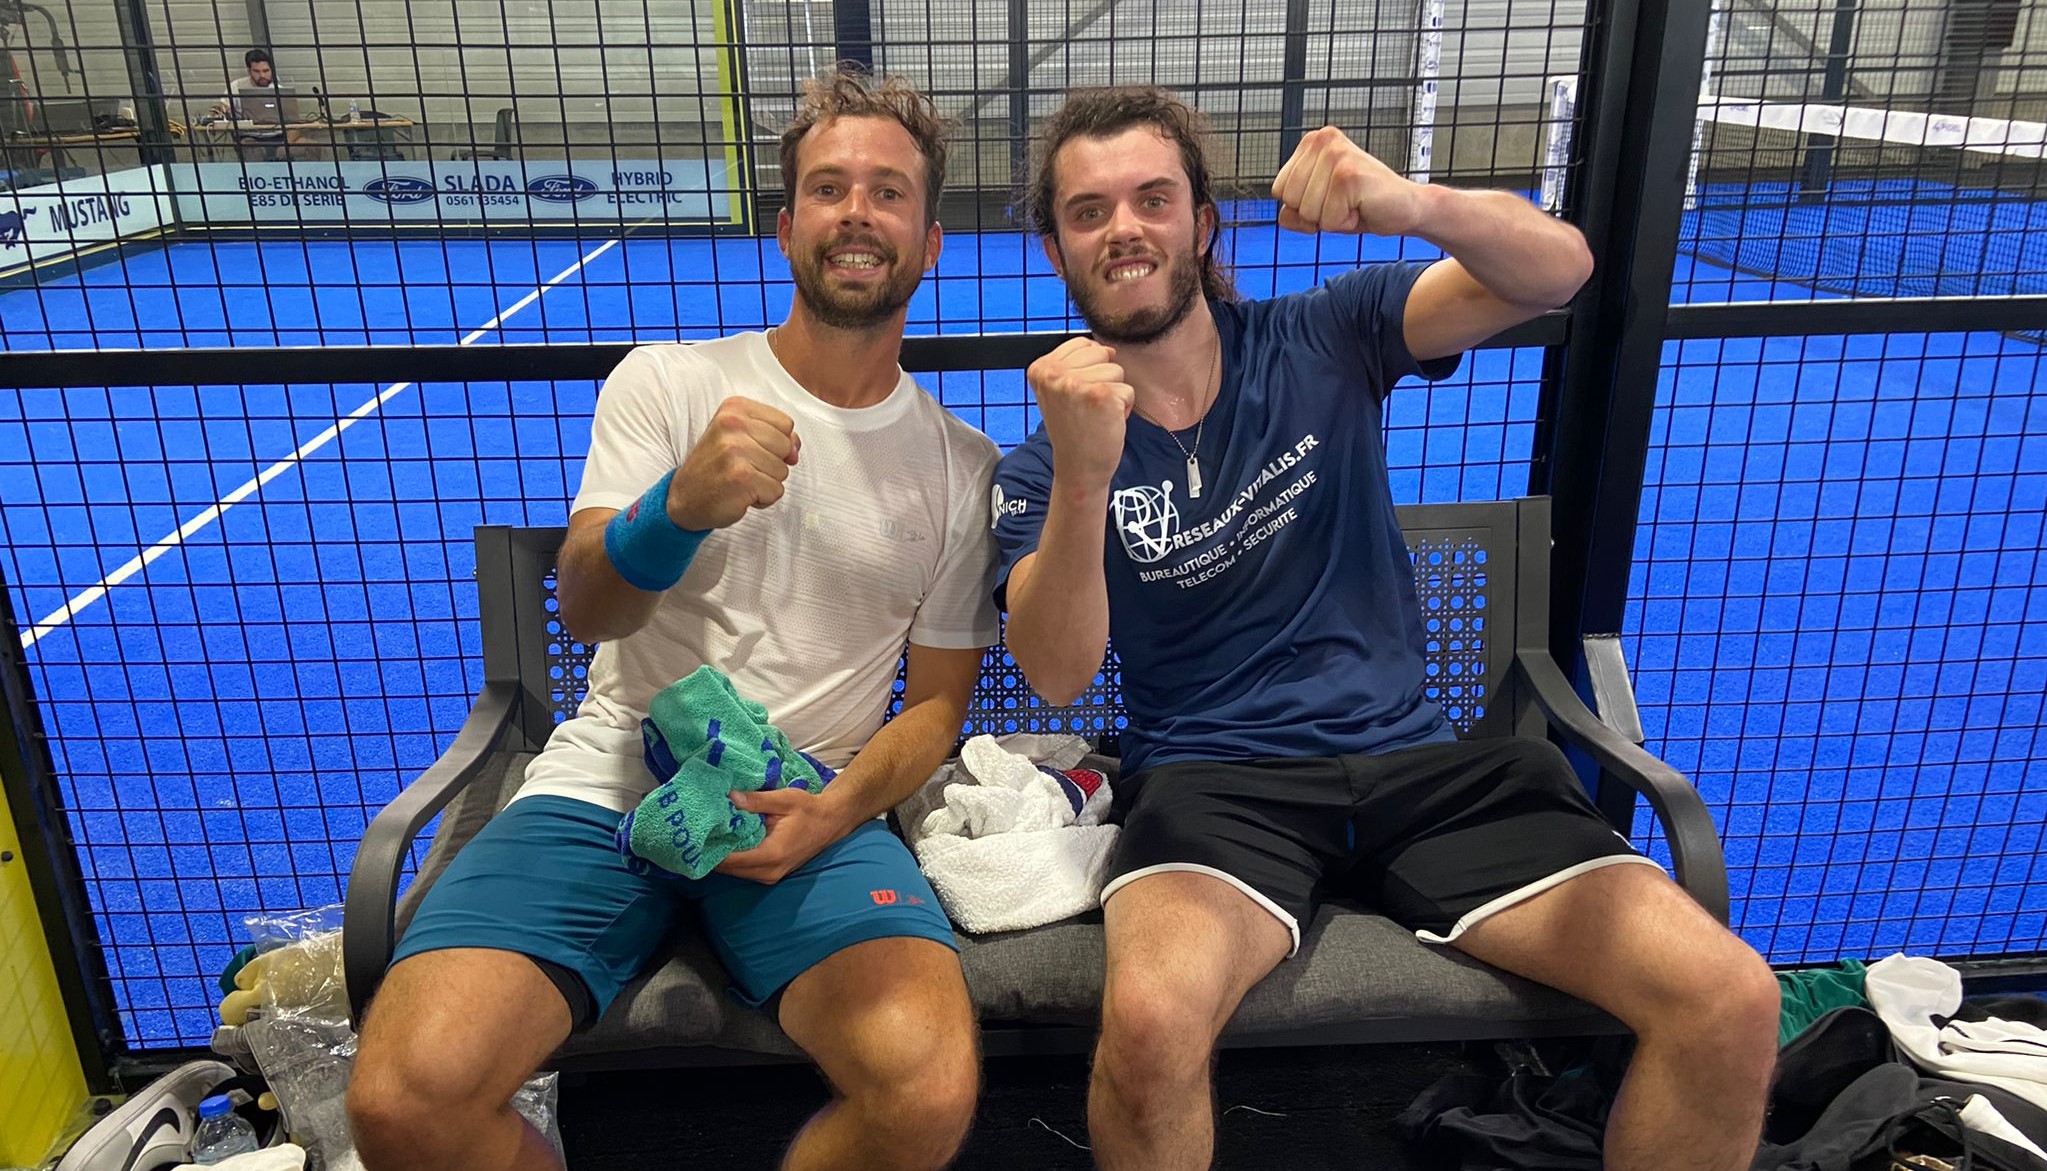 Auradou bright victory first round WPT Human padel Open 2022